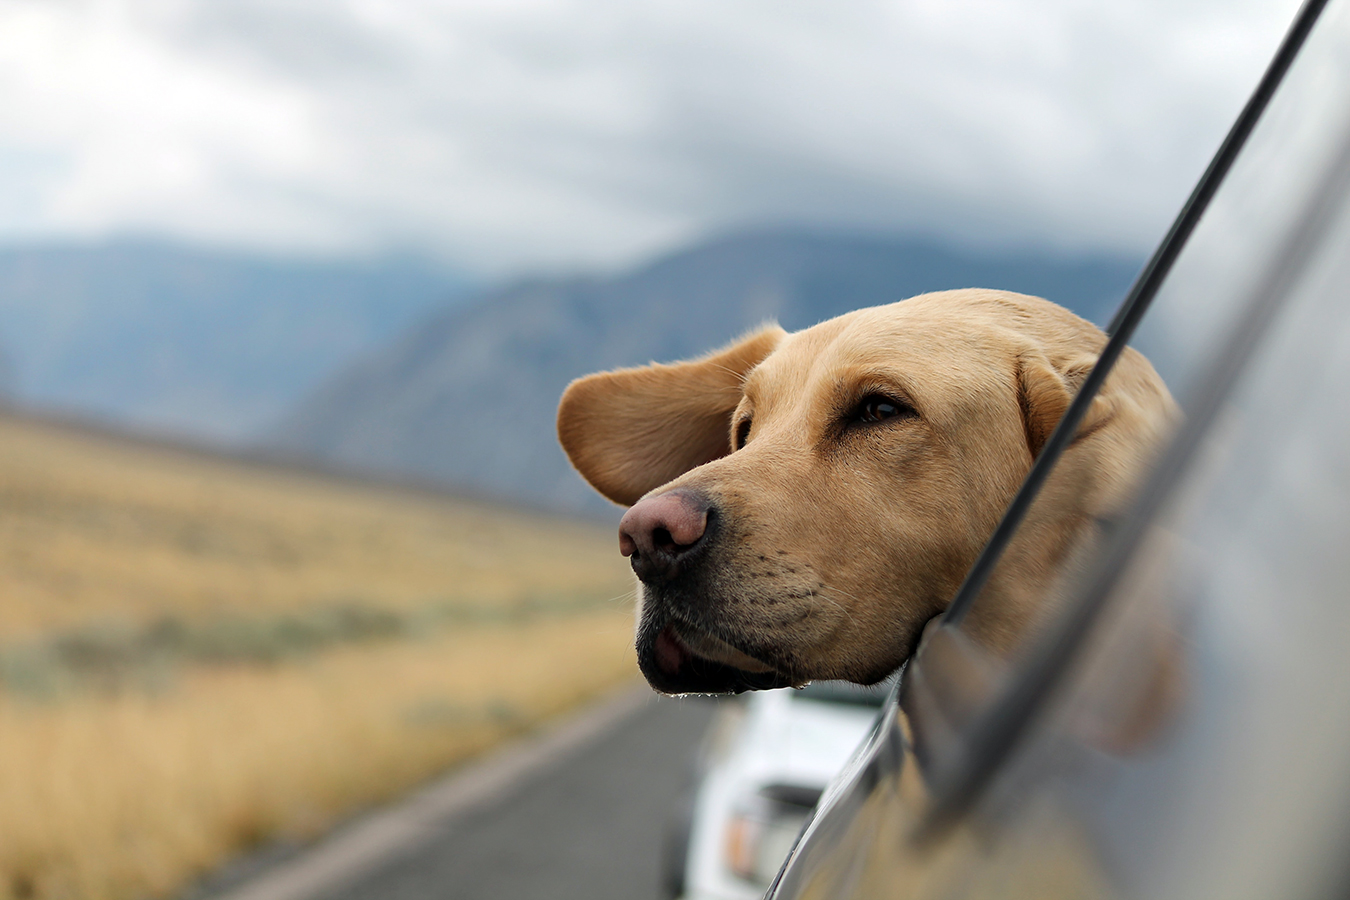 A Golden Retriever looking out the window of a moving car.